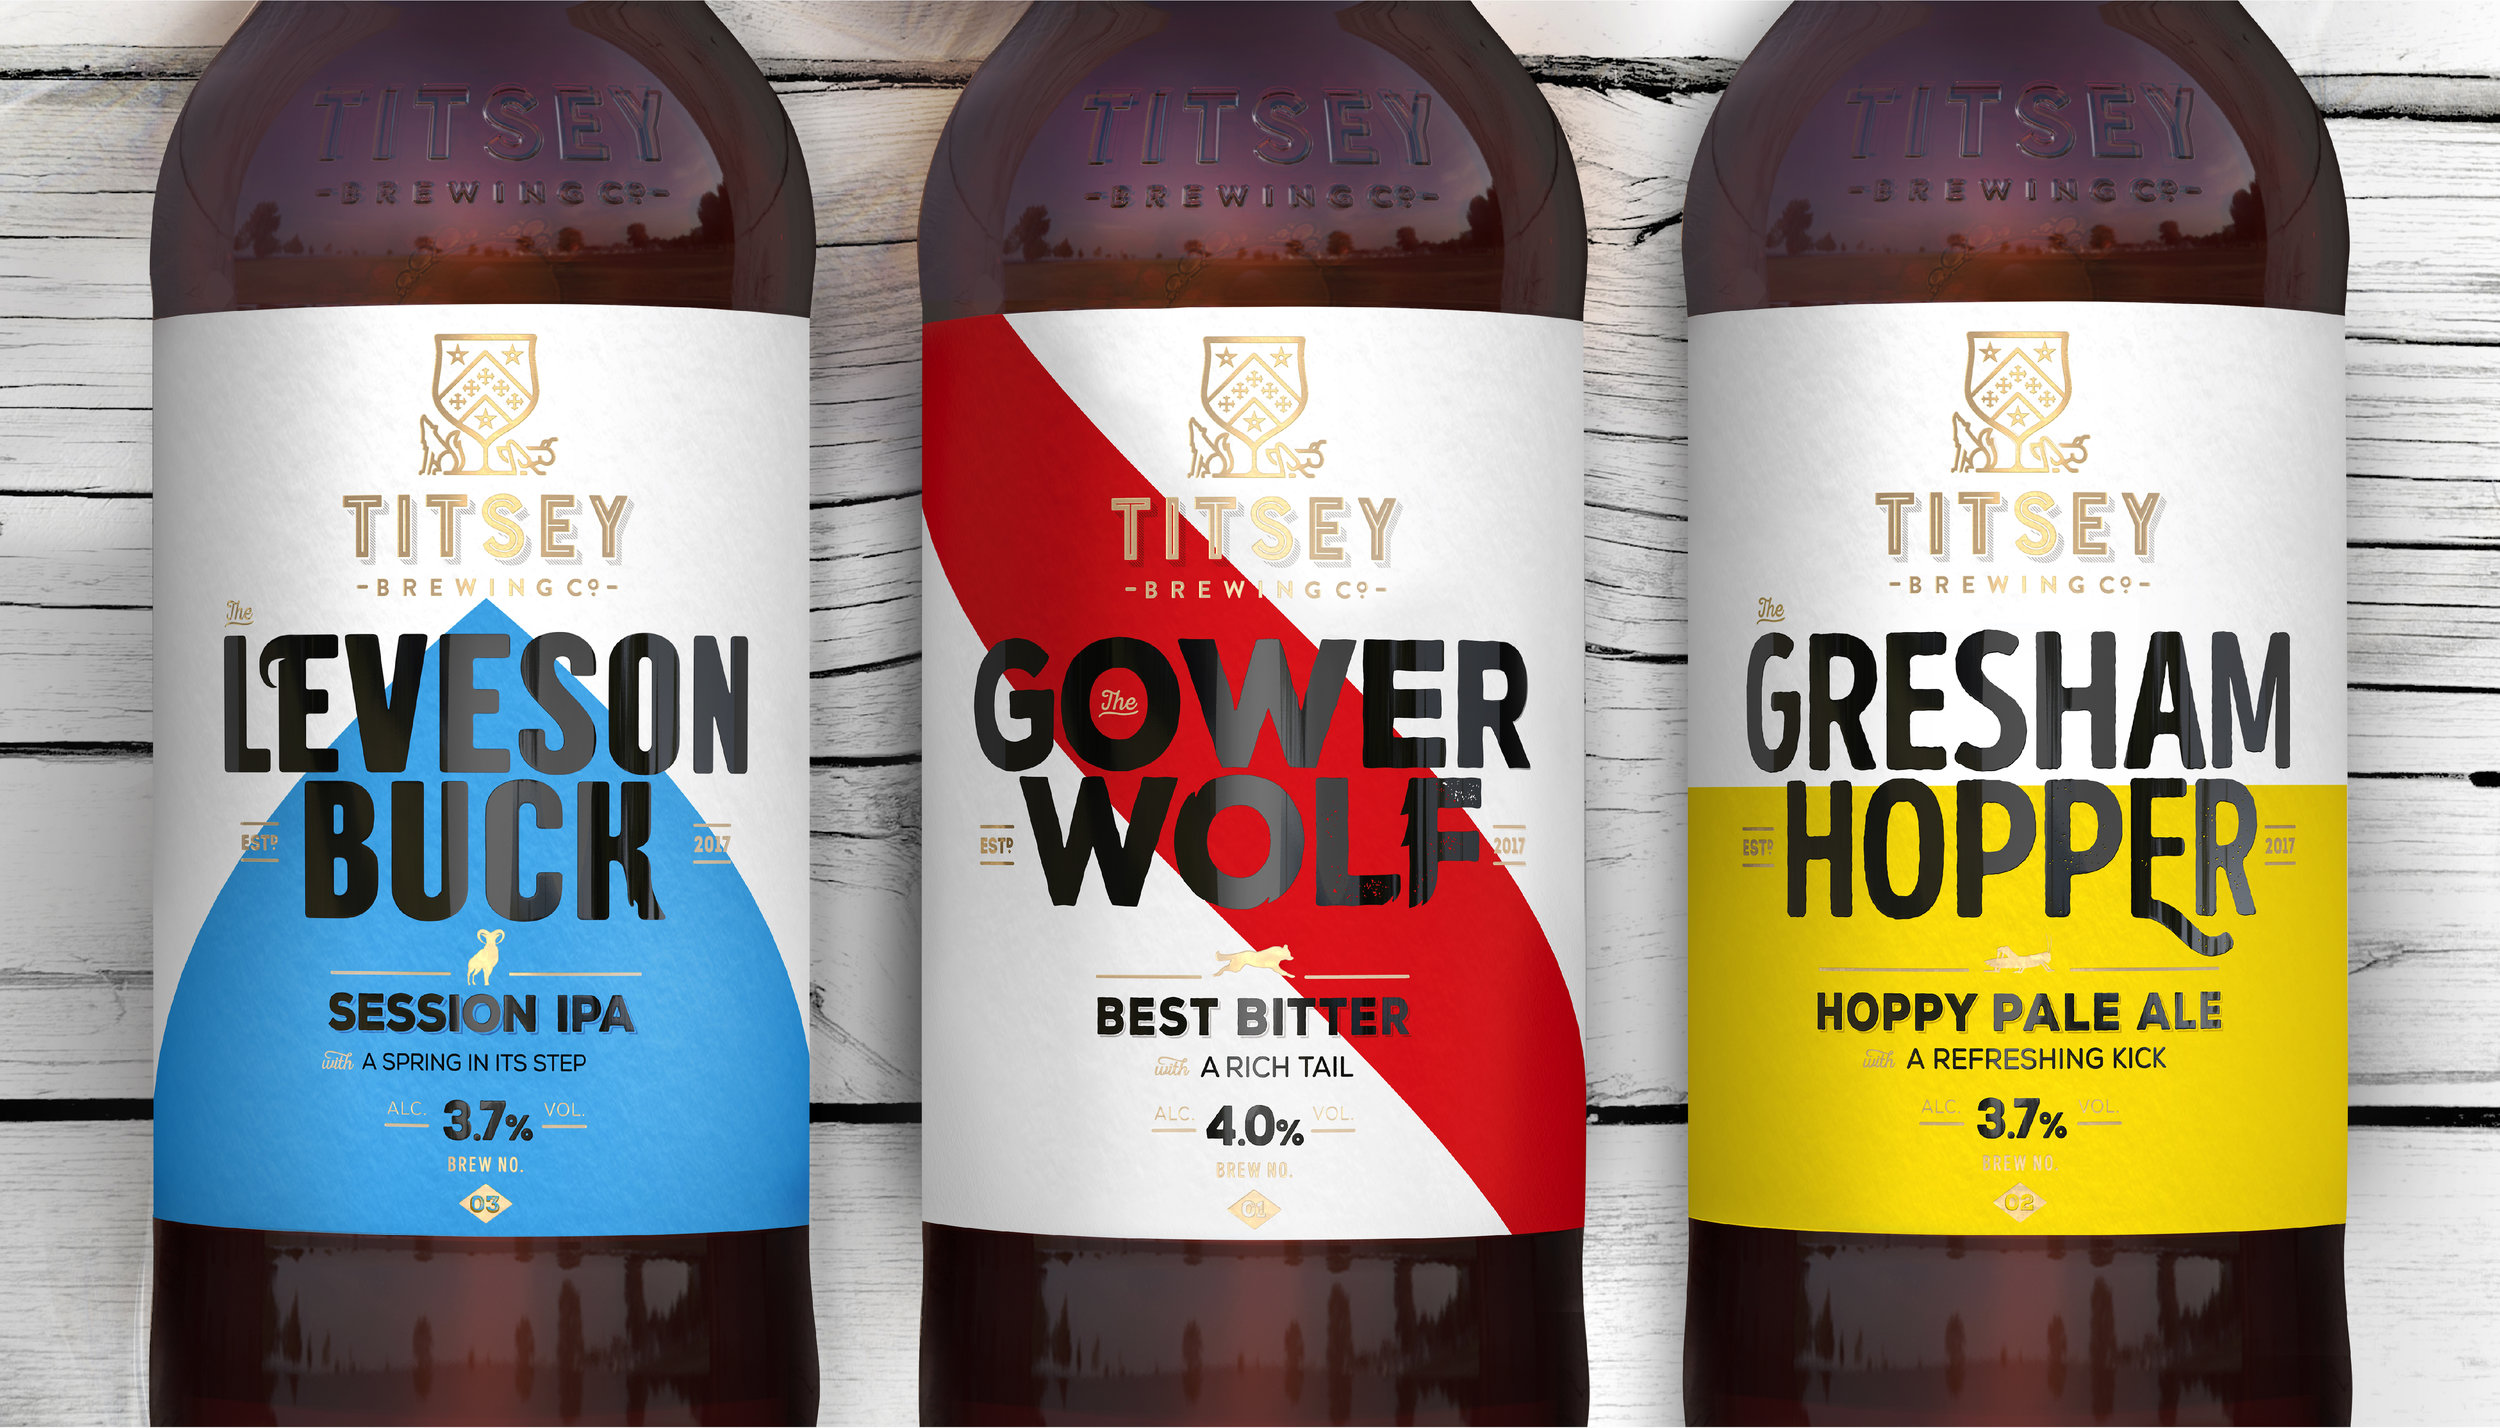 PB Creative Delivers a Rich and Compelling Brand Story for Titsey Brewing Co